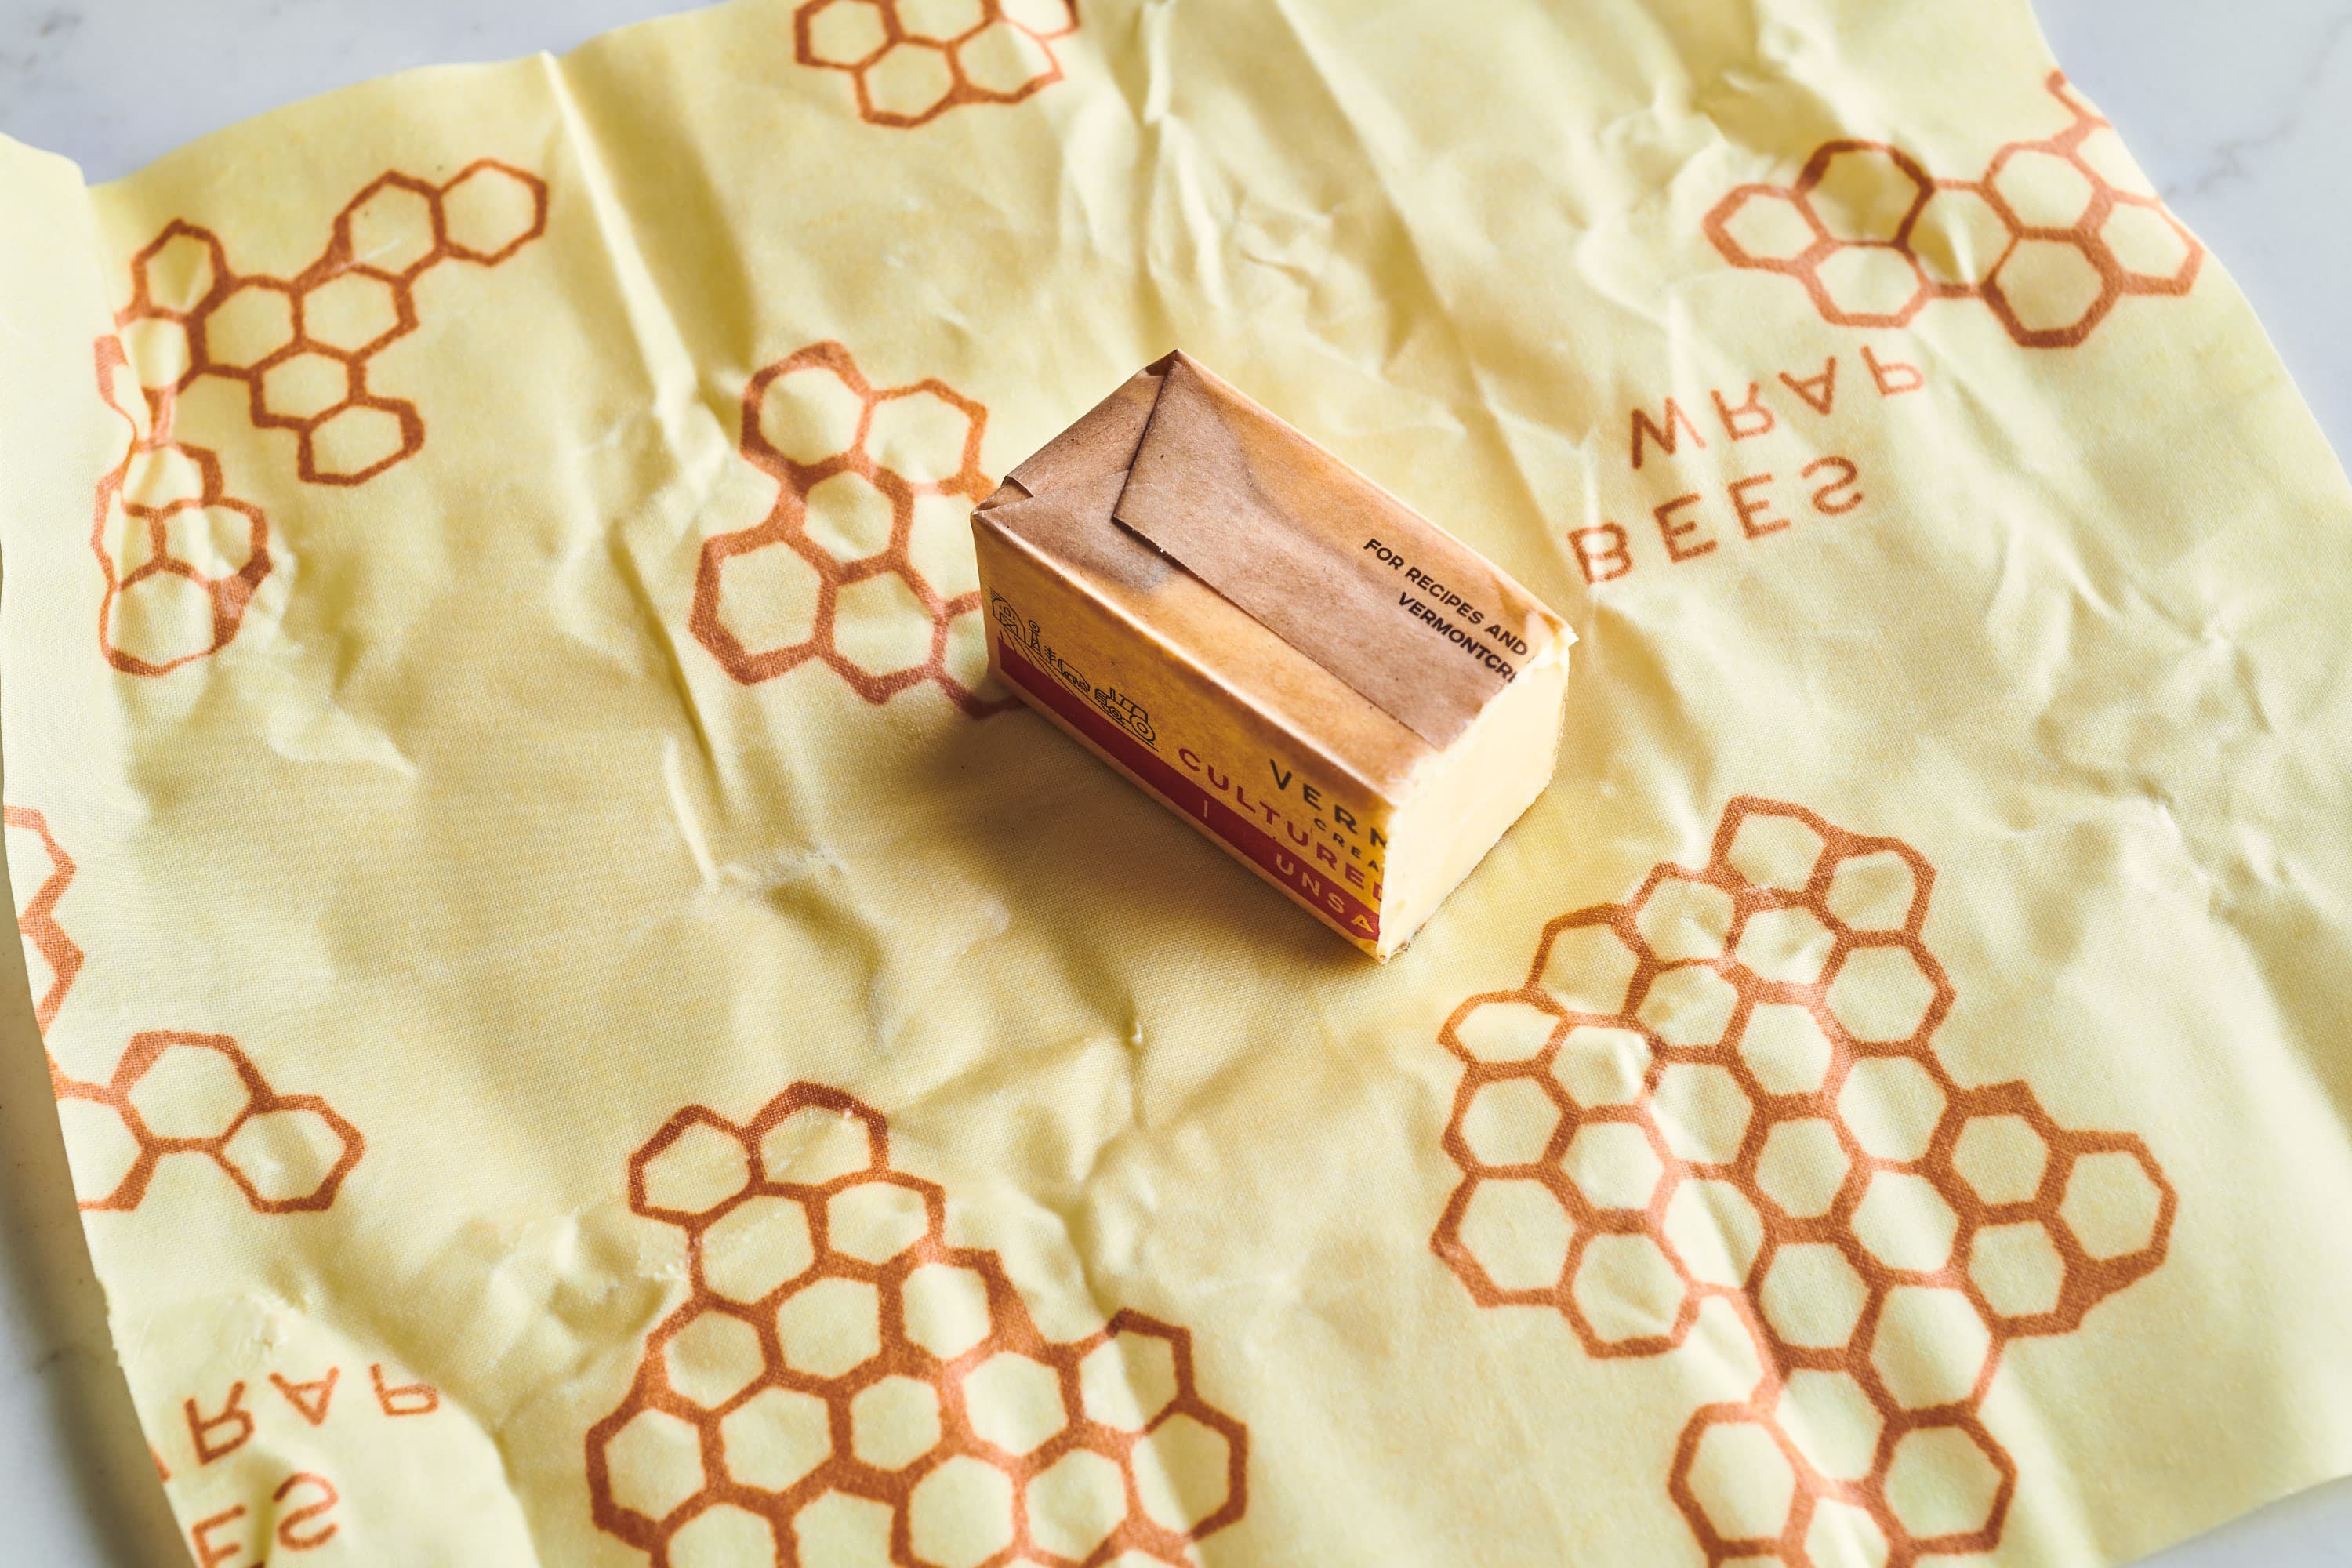 Bee Natural Wraps